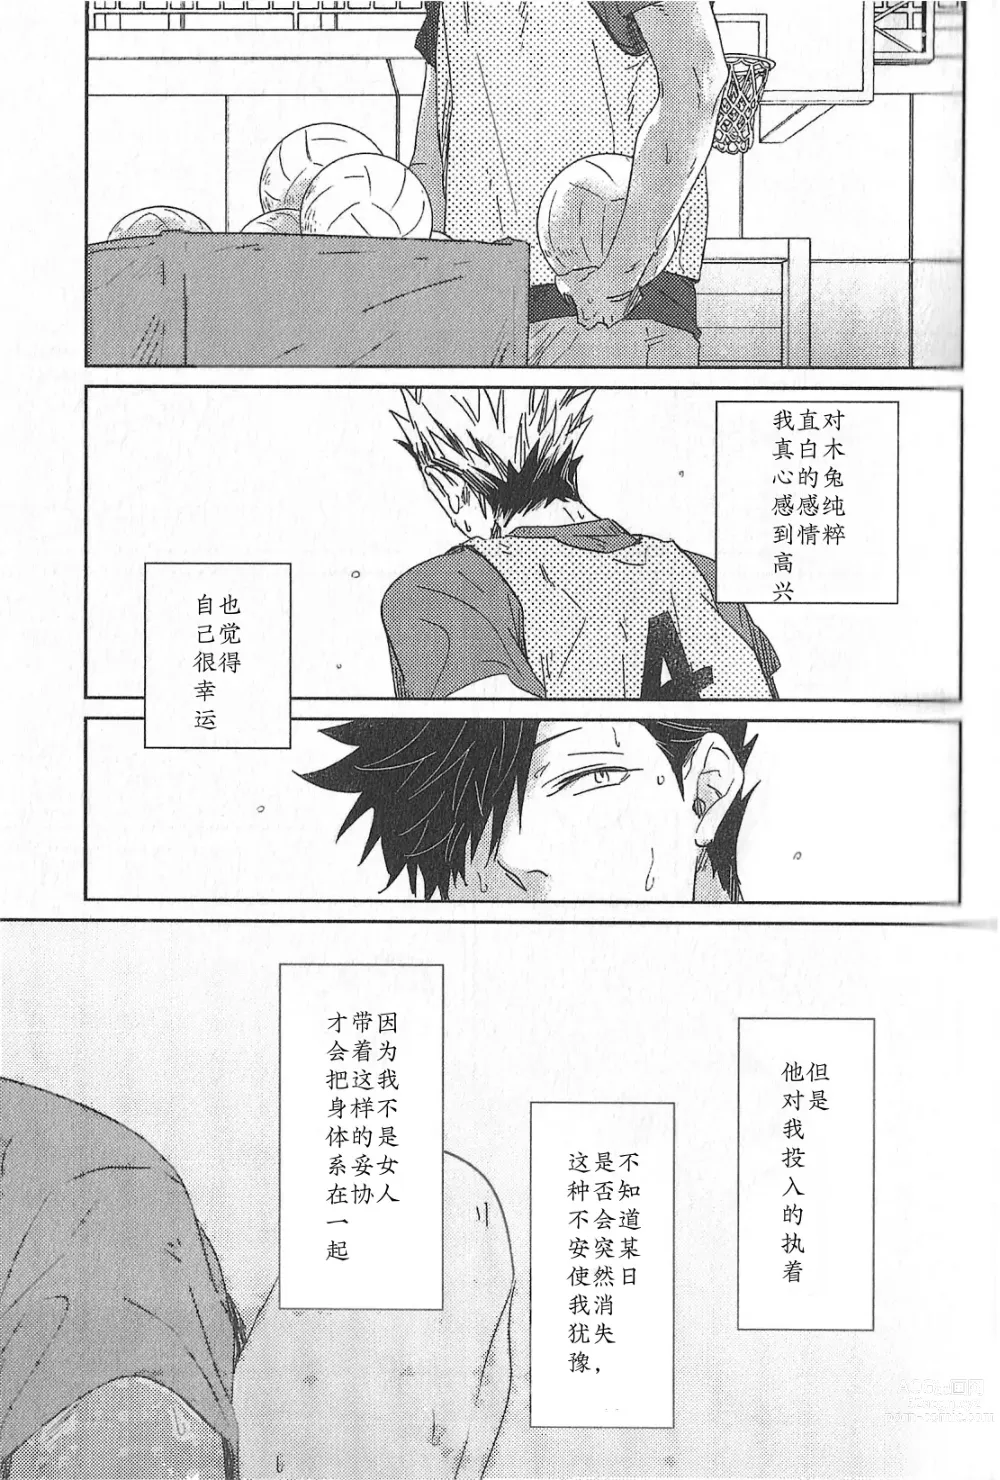 Page 16 of doujinshi 极境的野兽 前篇